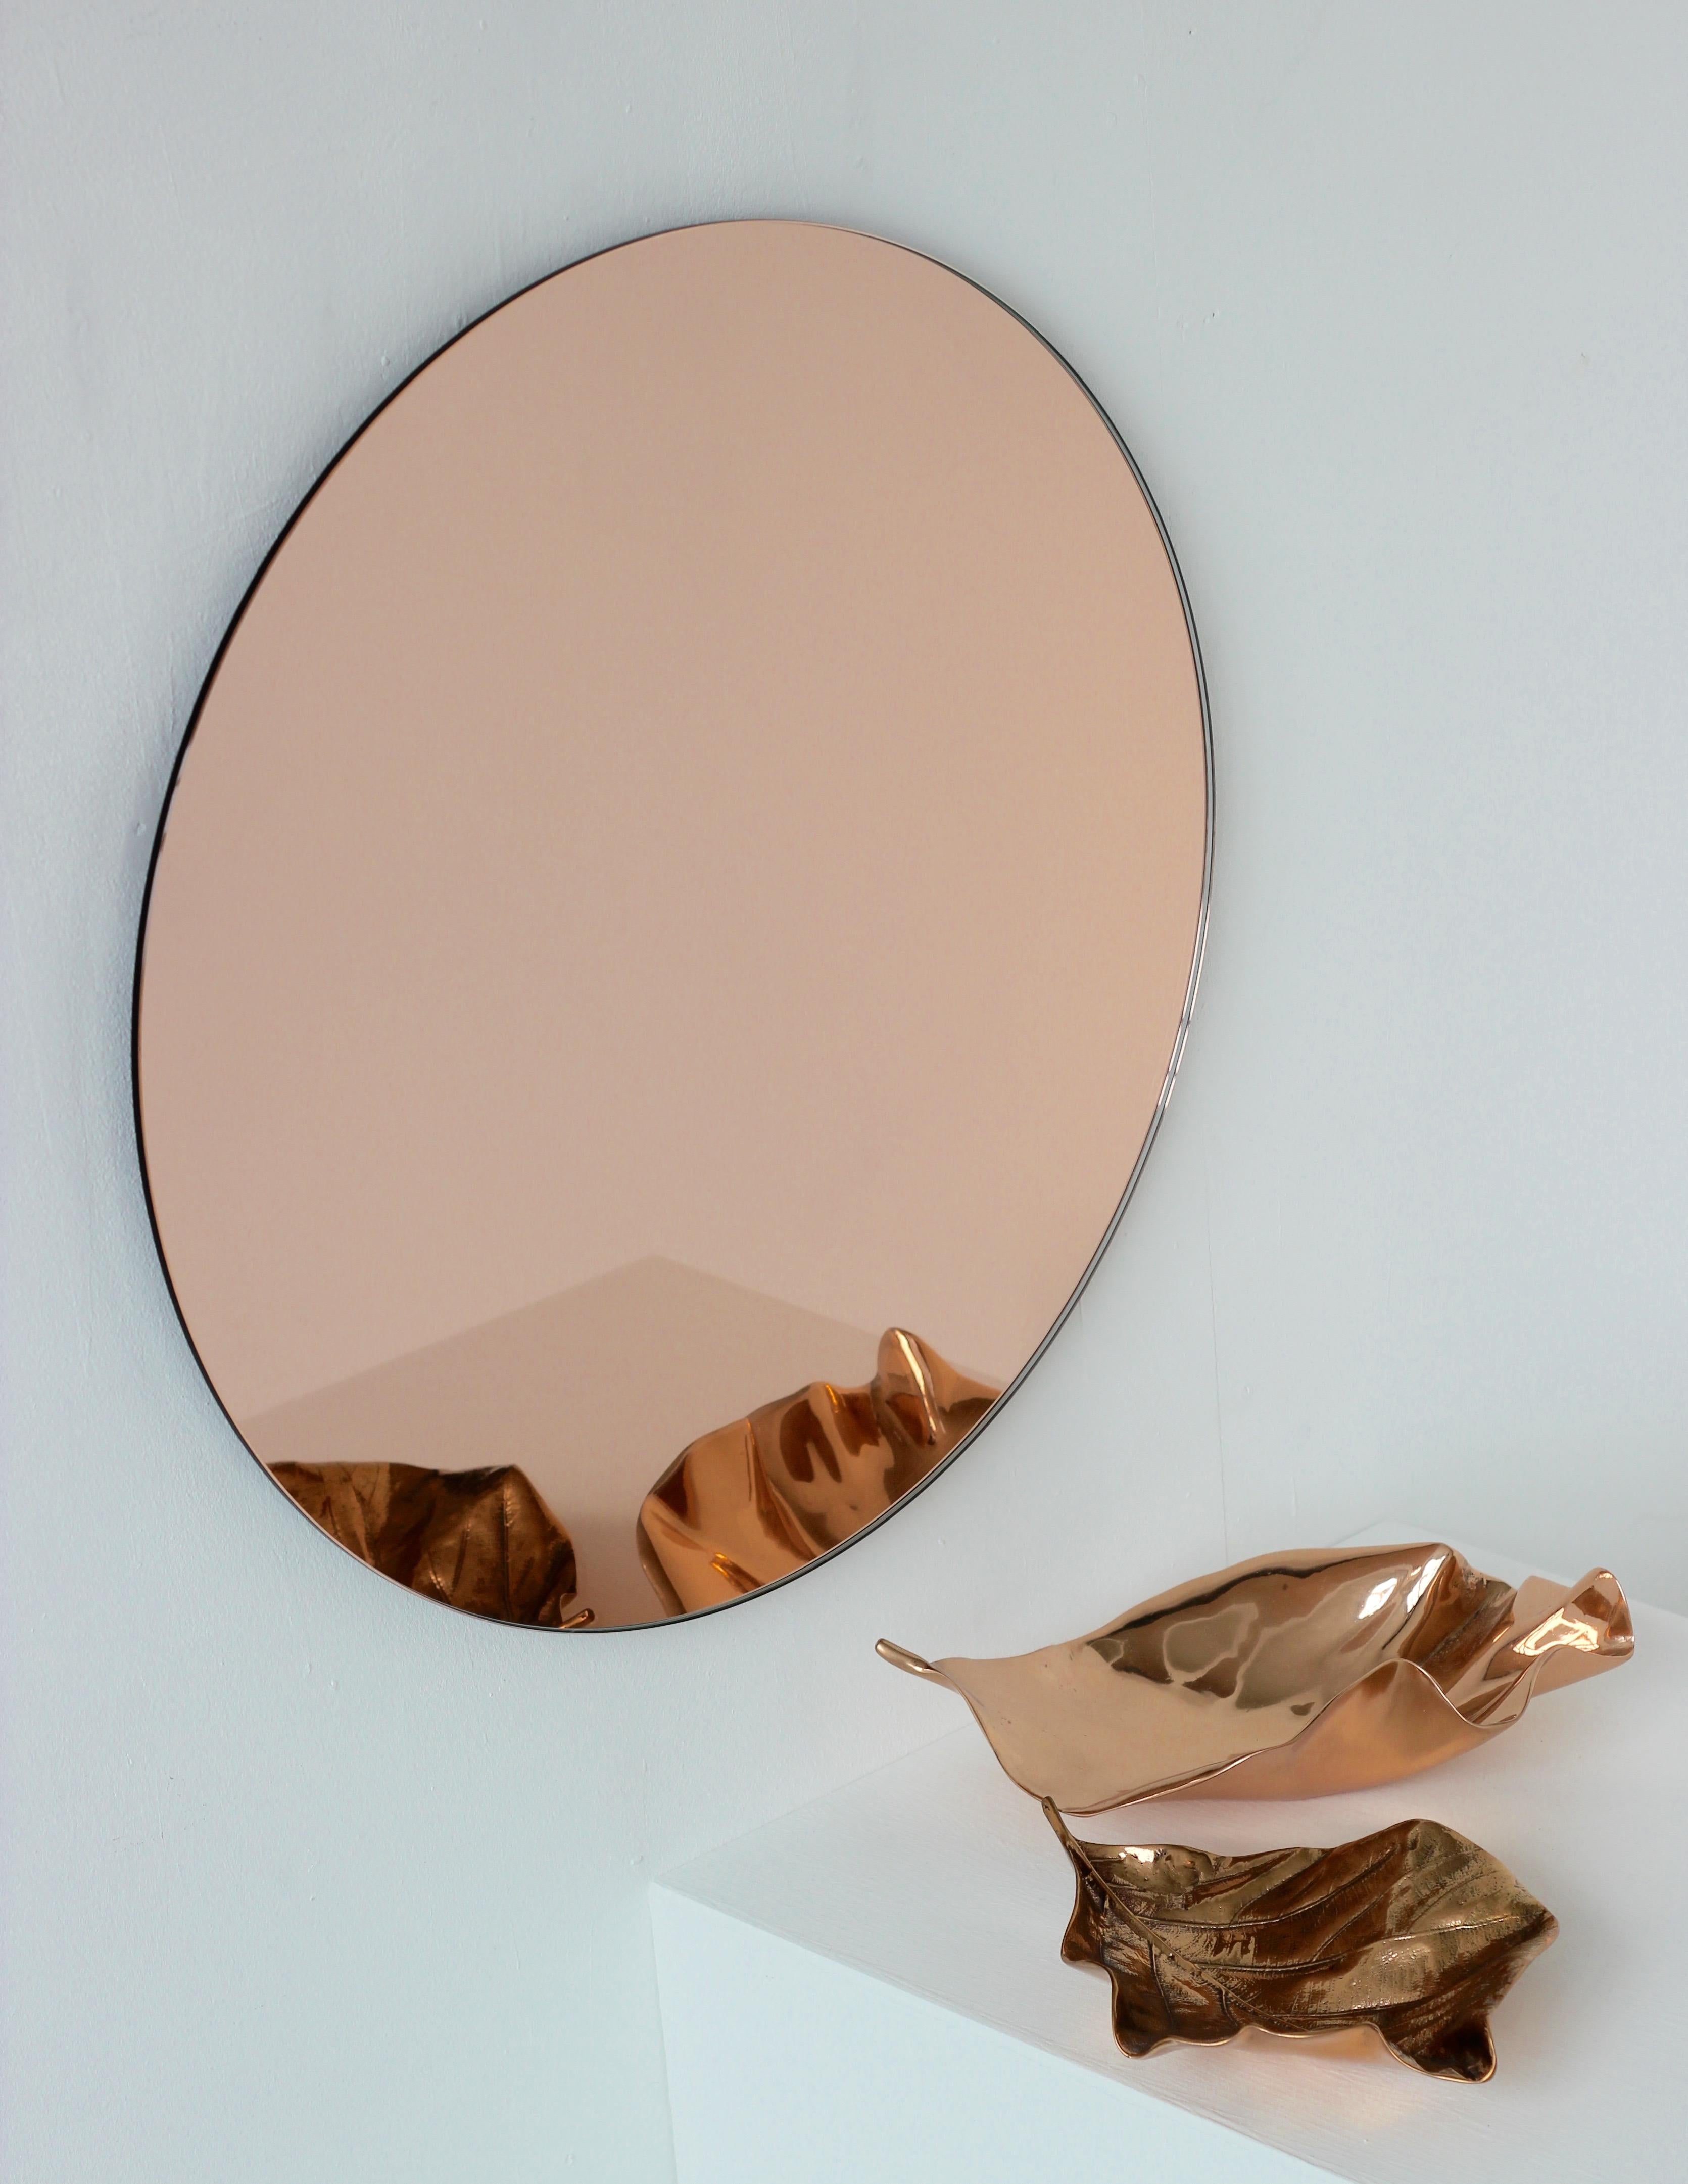 Organic Modern Orbis Rose Gold Peach Tinted Round Contemporary Frameless Mirror, Small For Sale